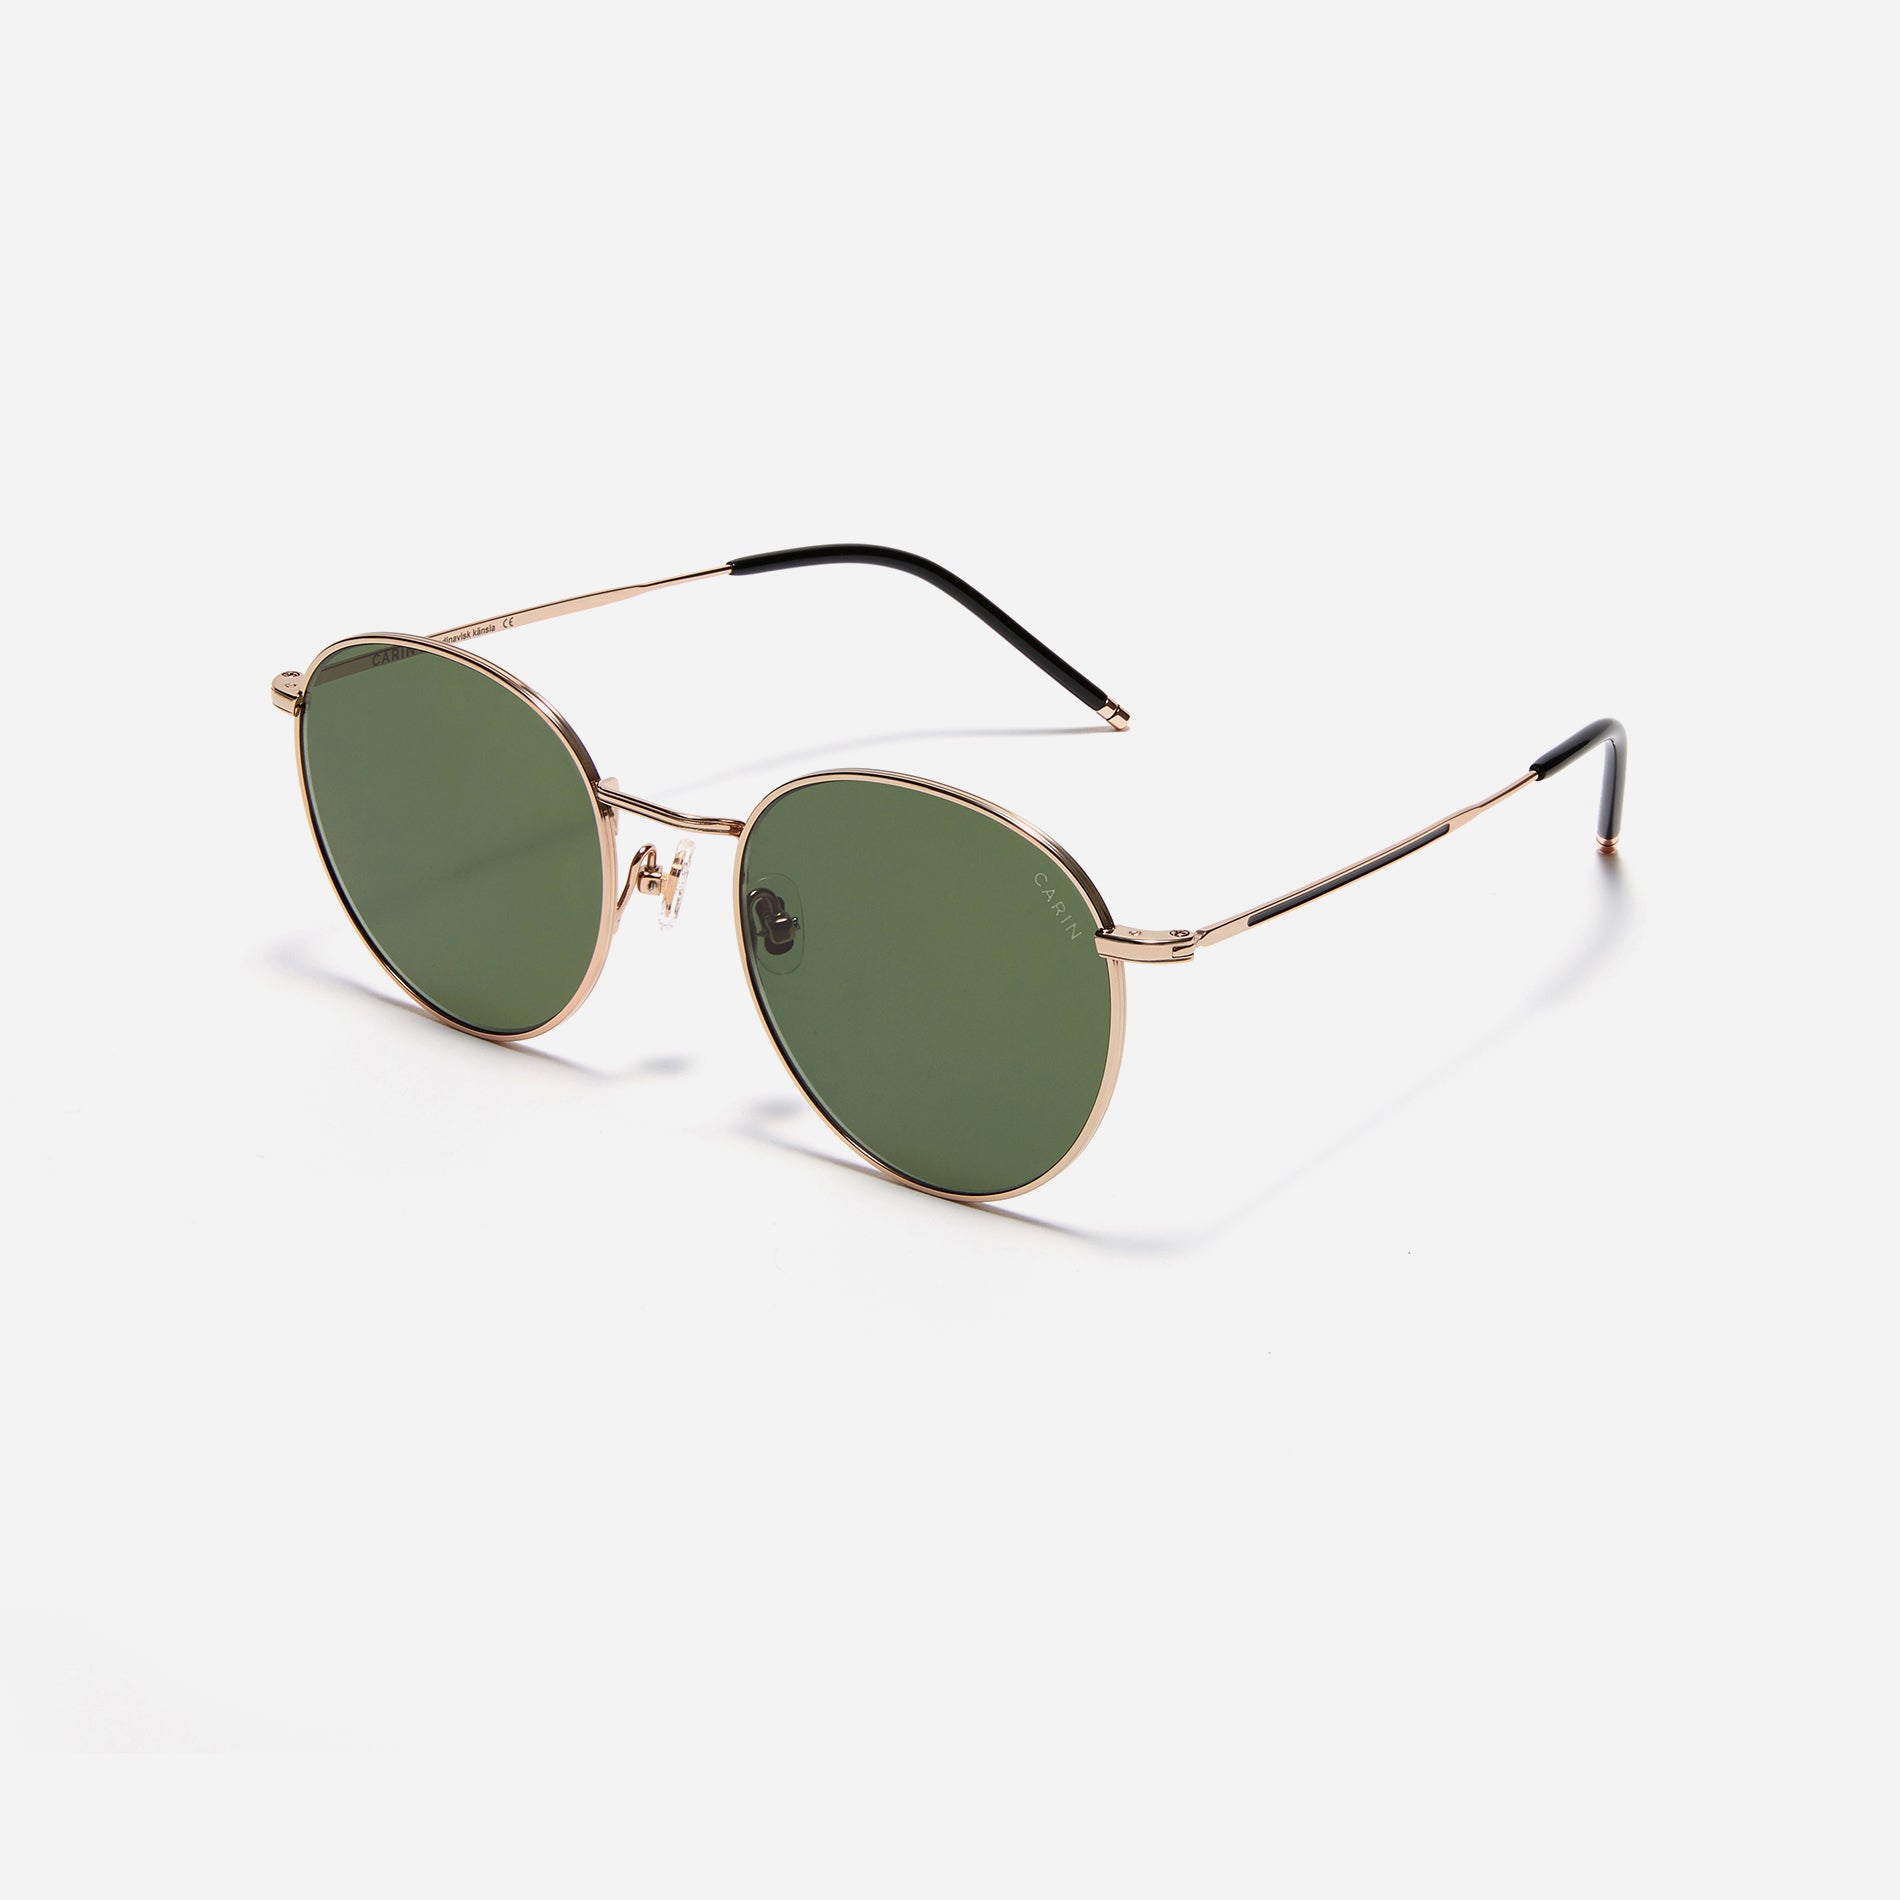 Round-shaped metal sunglasses that offer a soft and natural look with a peach-shaded titanium frame. 